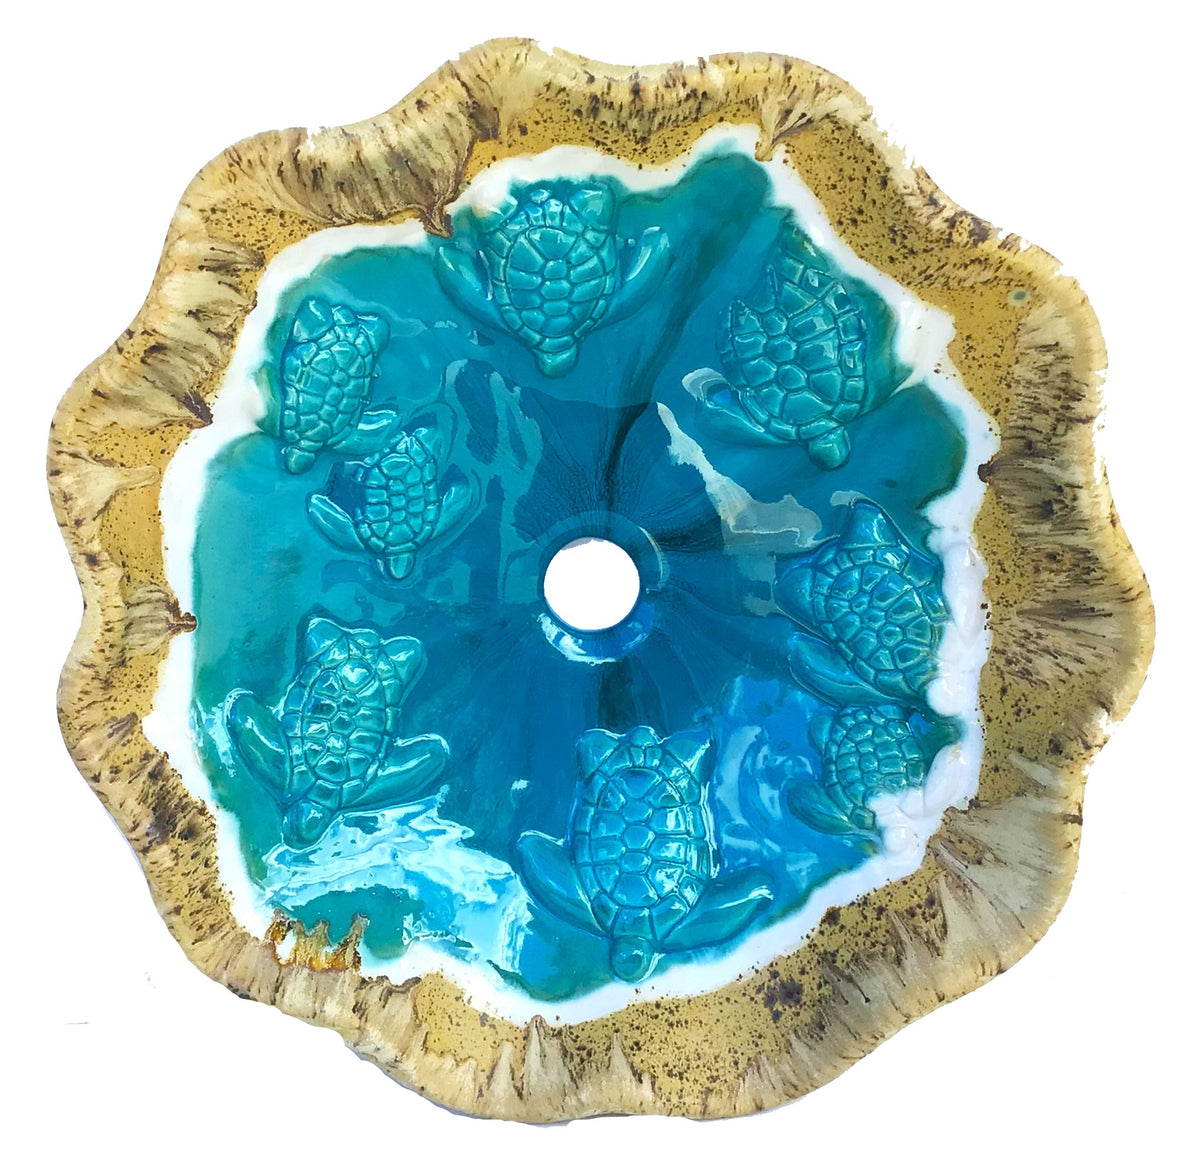 Above vessel bathroom sink, with ultra turquoise & sandstone glazes, and eight relief turtles.